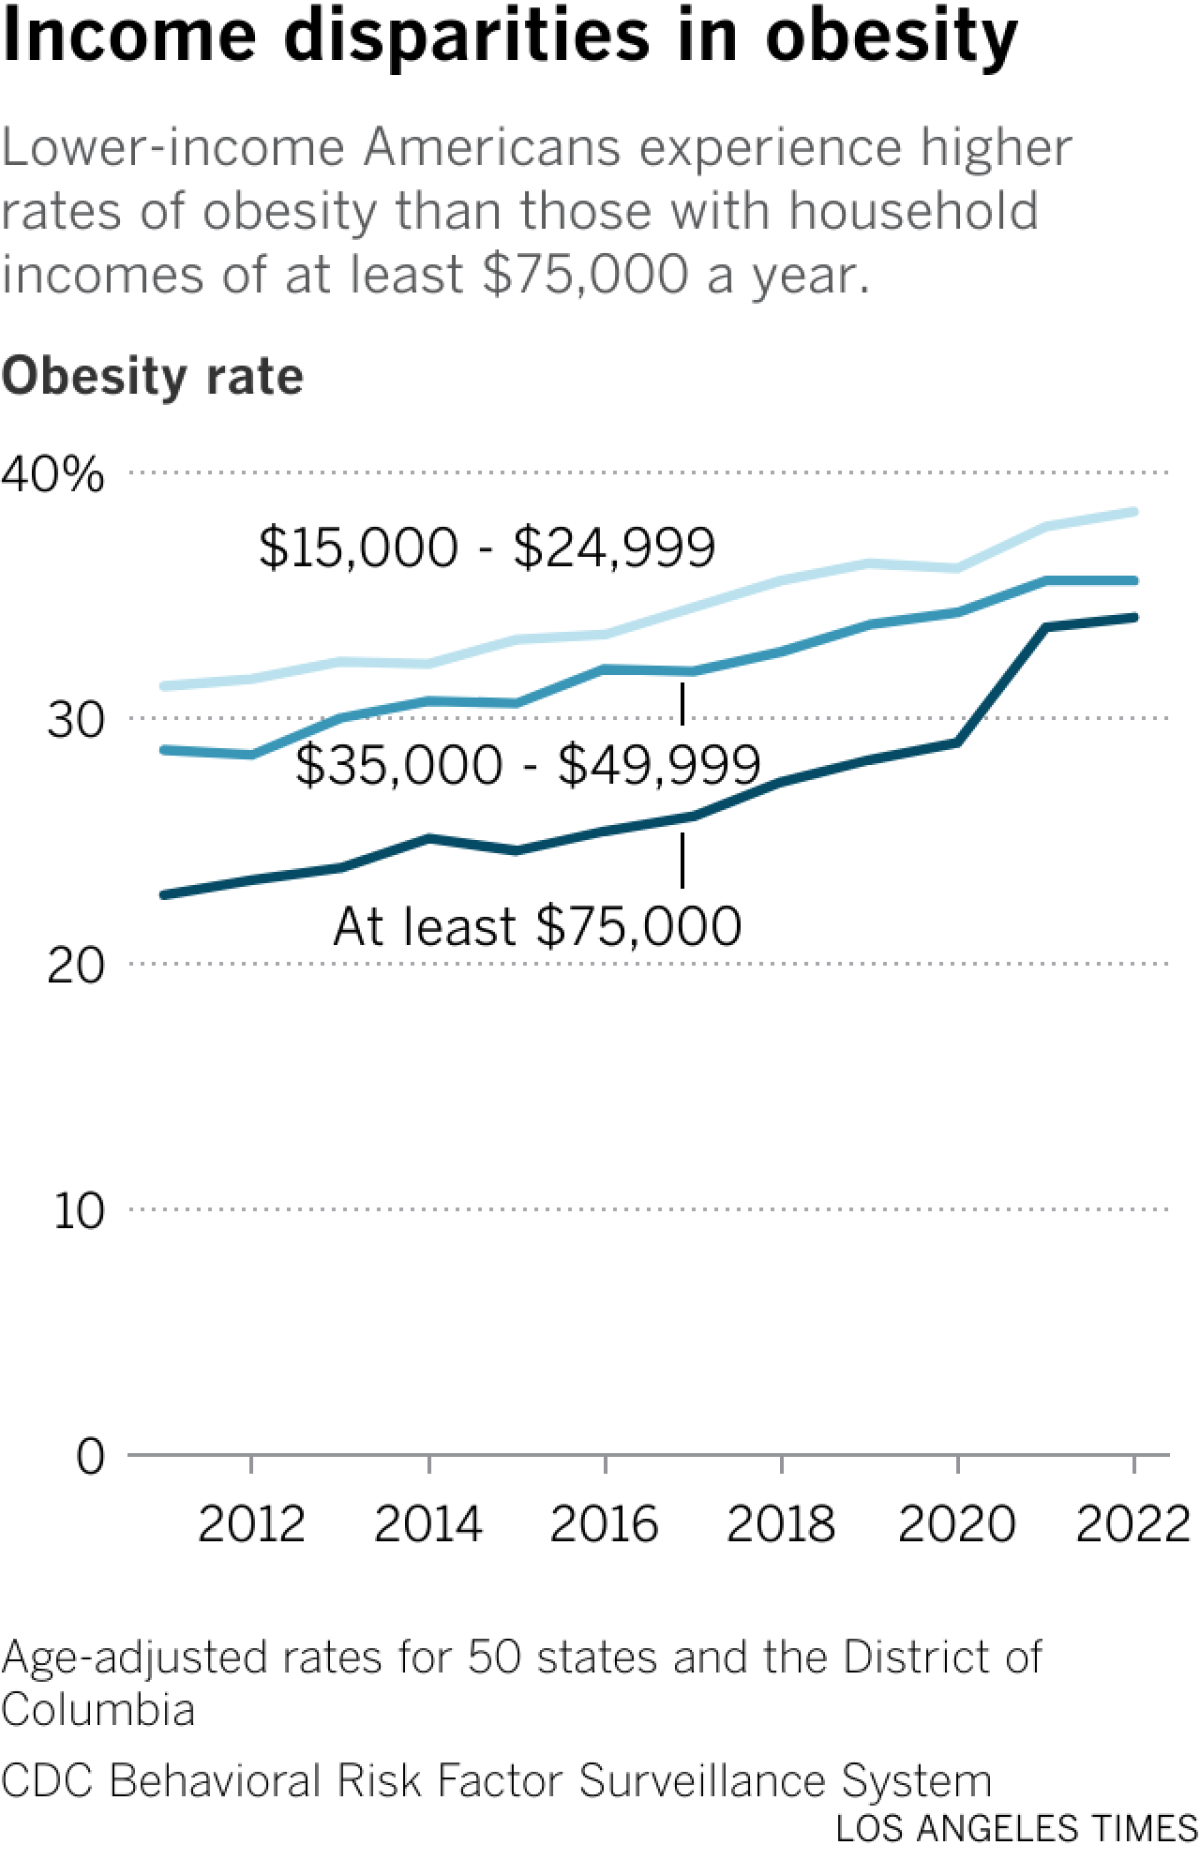 The line graph shows obesity rates in three income categories: $15-26,000, $35-50,000, and $75,000 and above. The proportion of people with low incomes is higher, but rising in all categories.